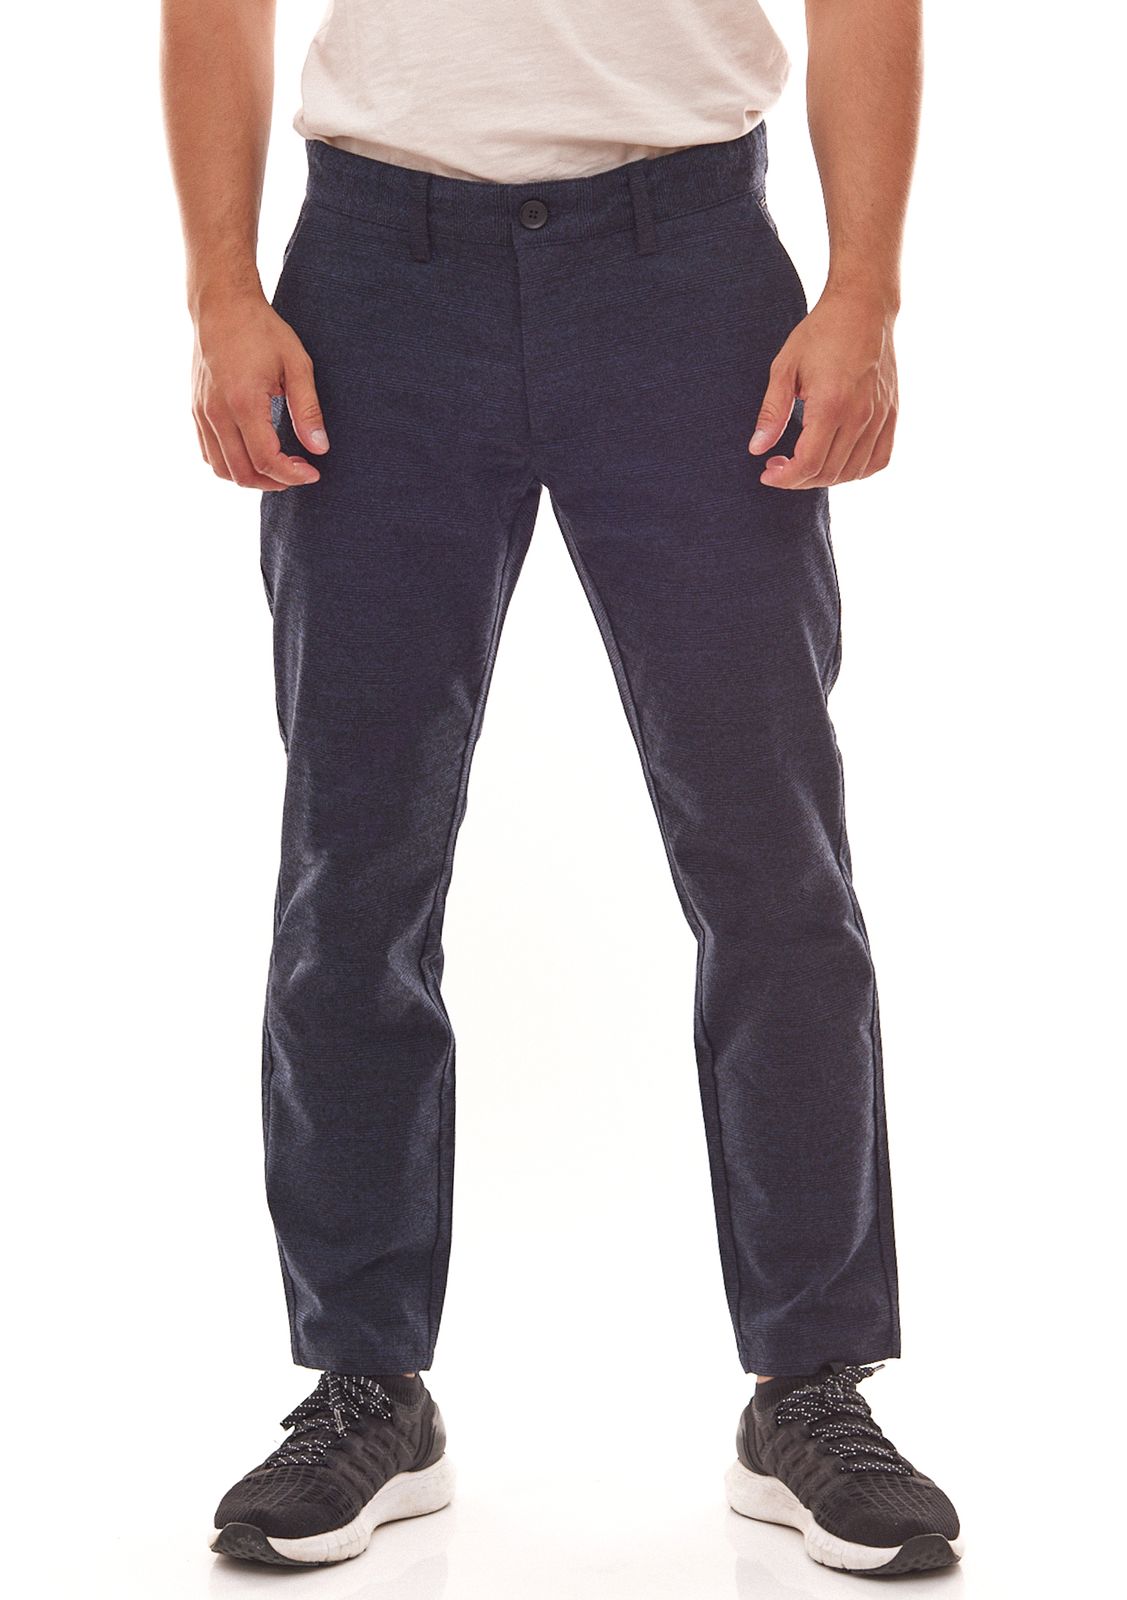 ONLY & SONS Herren Chino-Hose Stoffhose Mark Kamp Tap Pant Schwarz von ONLY & SONS